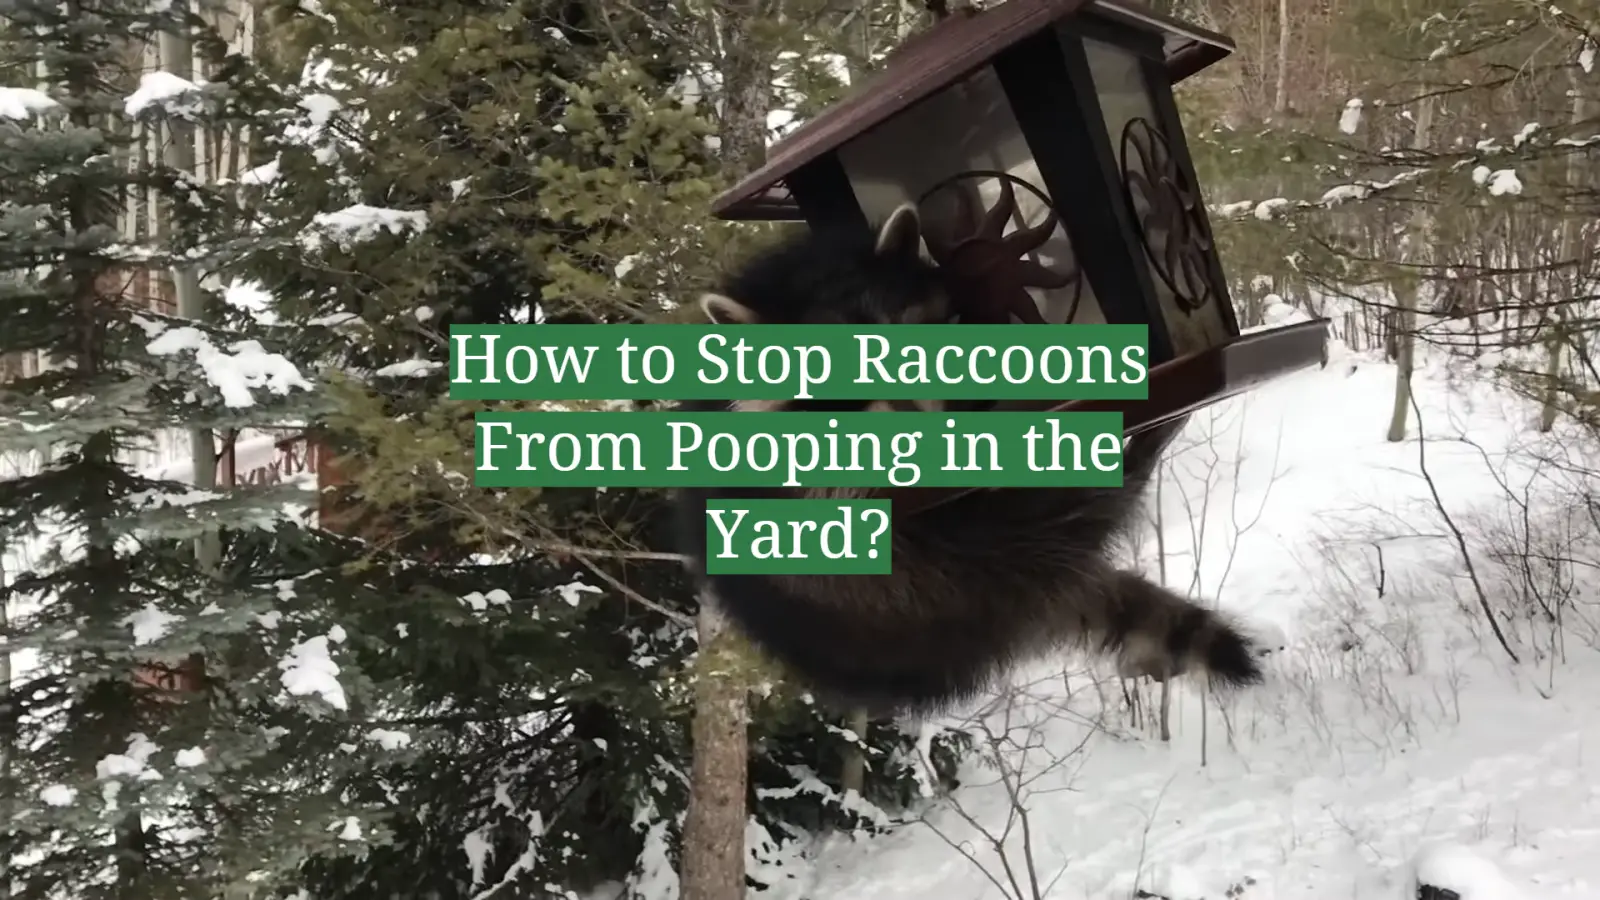 How to Stop Raccoons From Pooping in the Yard?